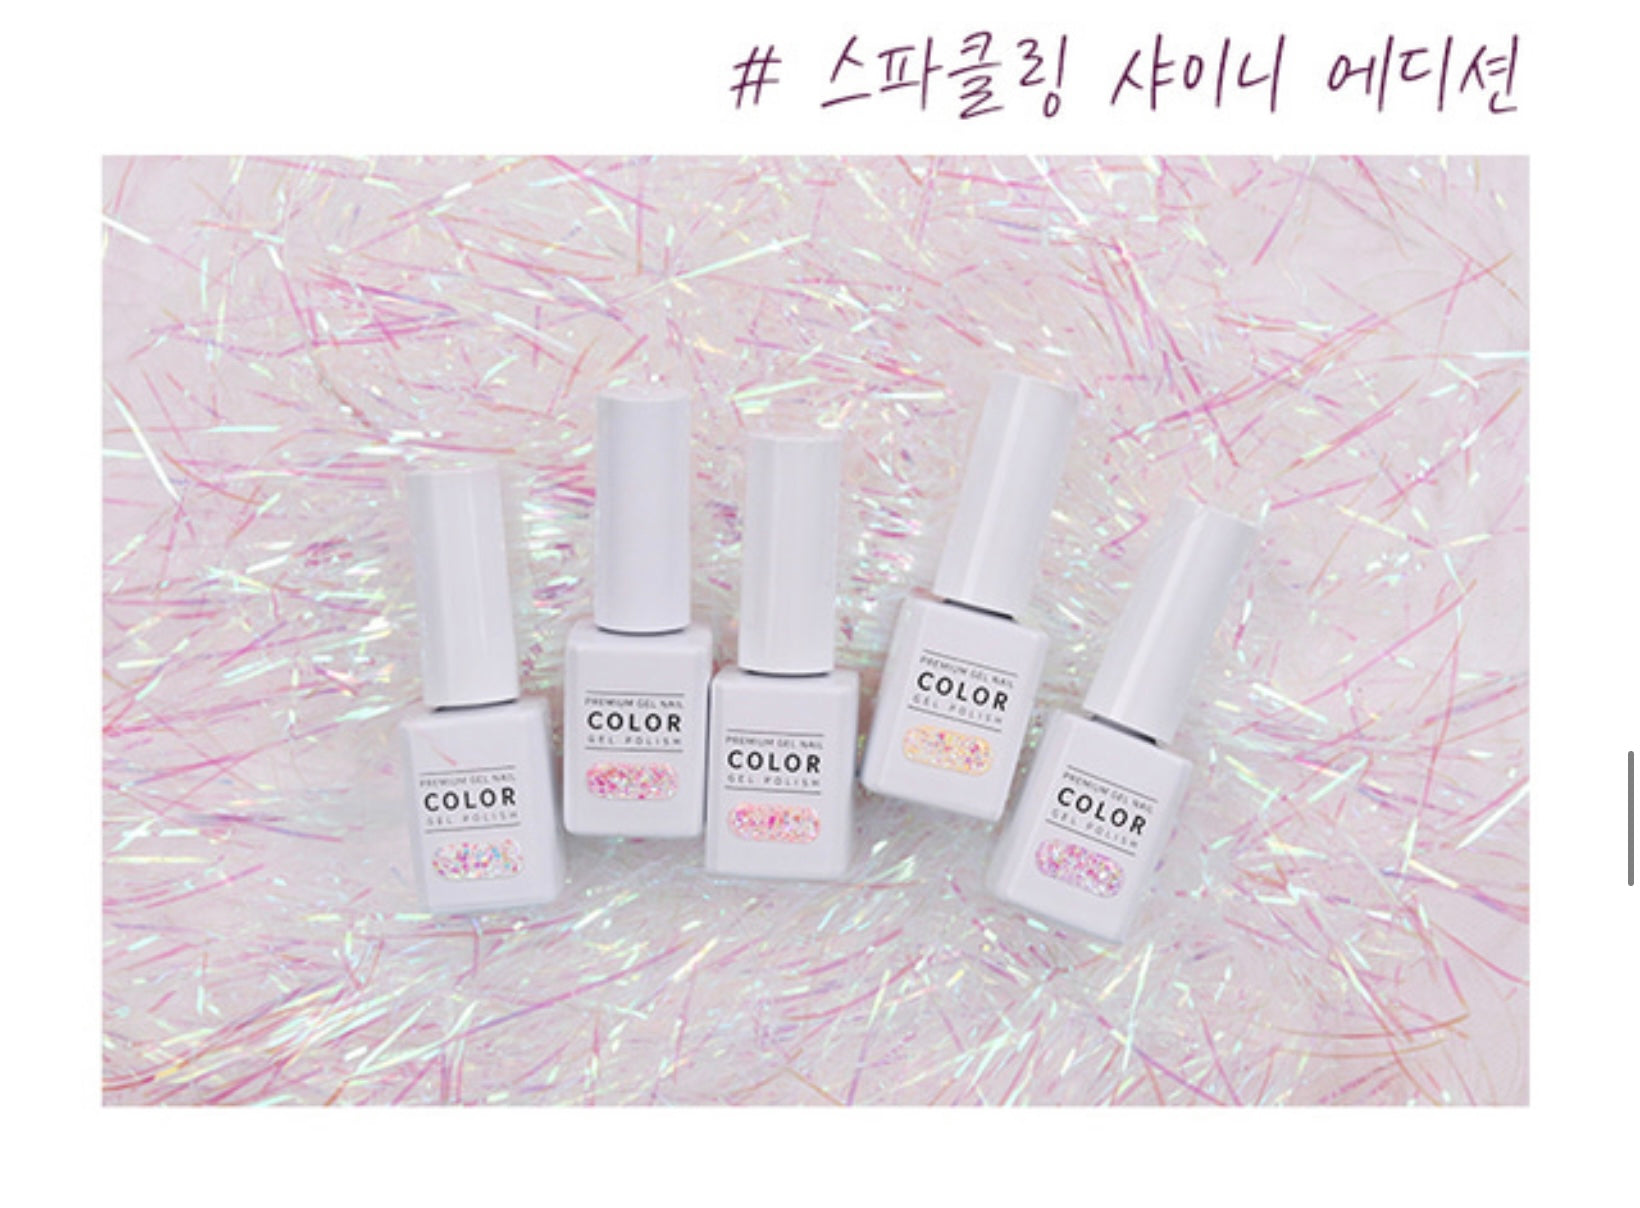 THE GEL sparkling shiny 5pc collection